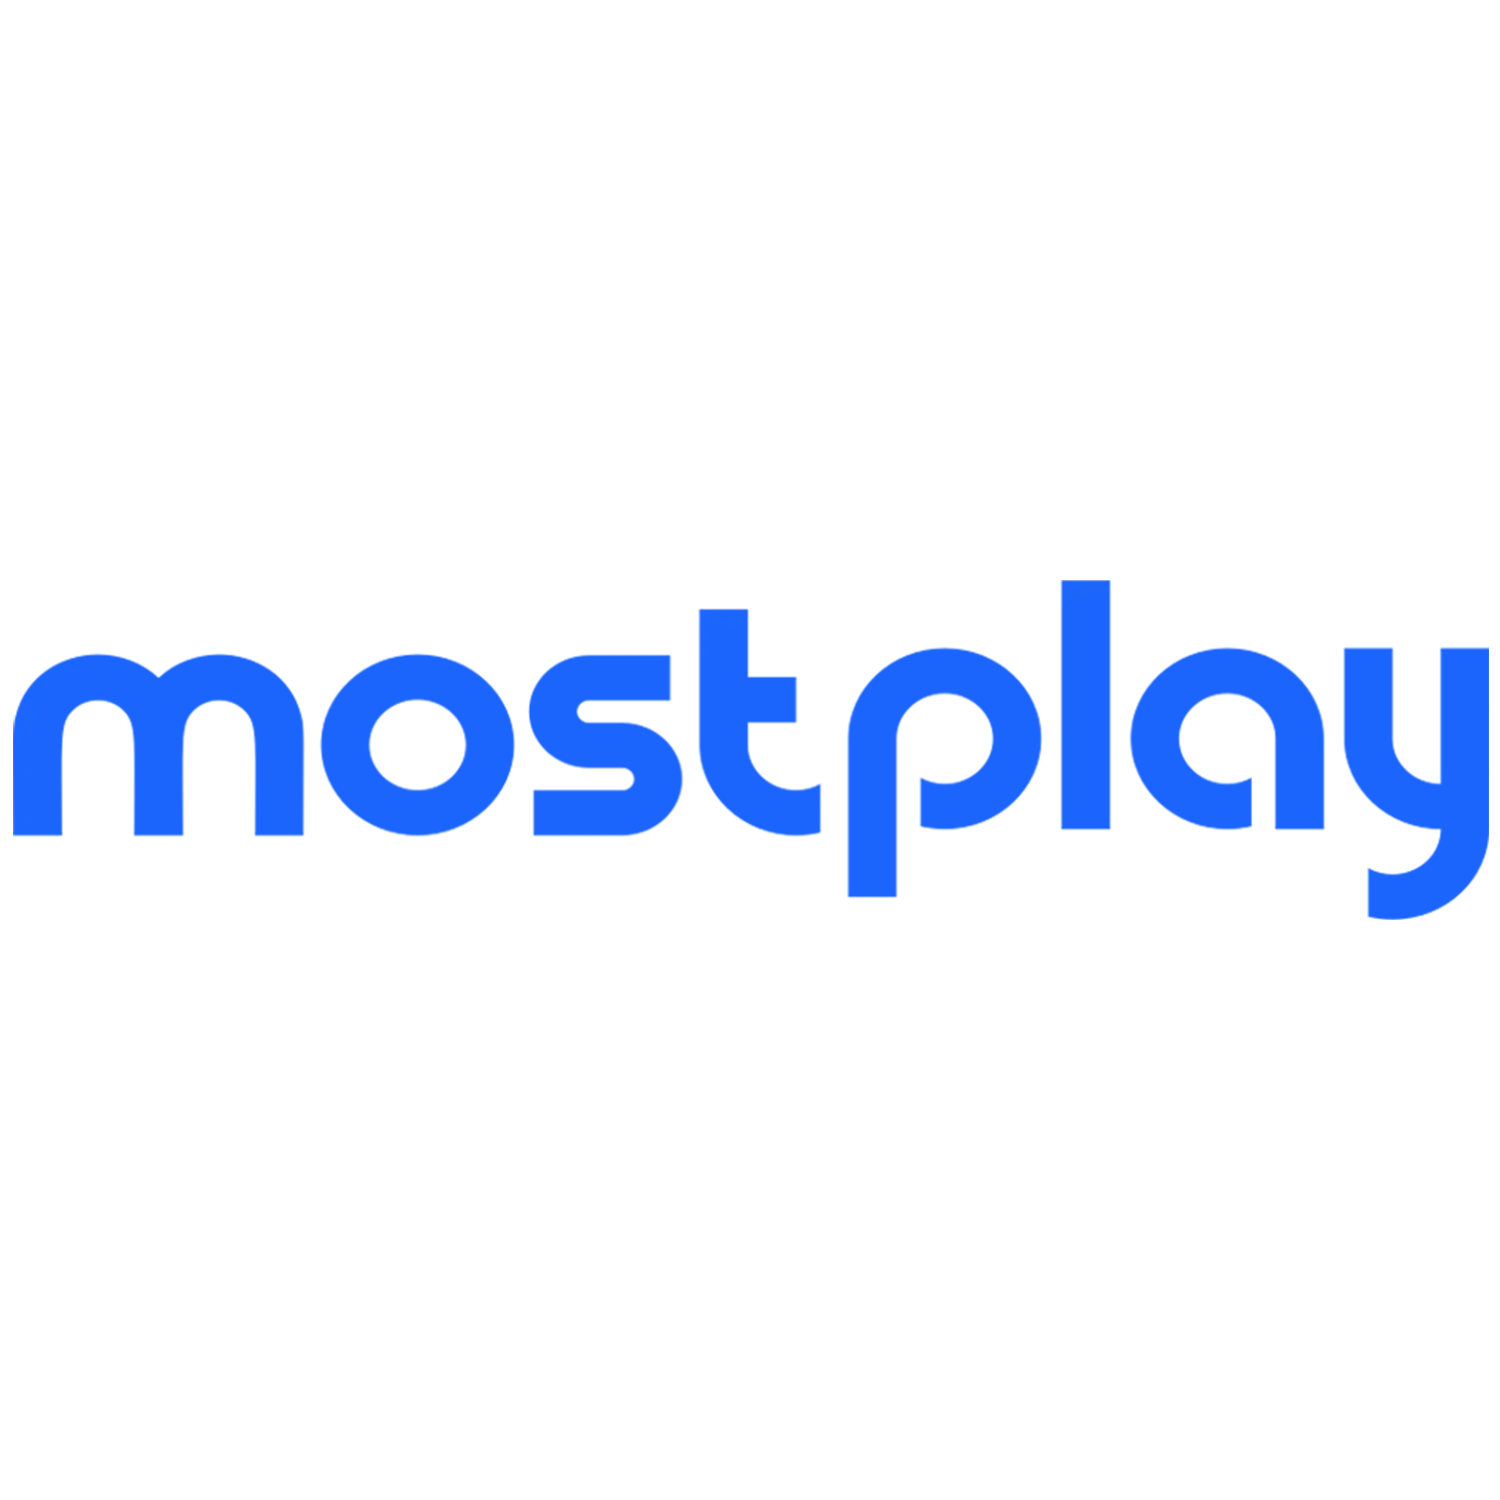 Visit the Mostplay website and start betting and playing casino games.